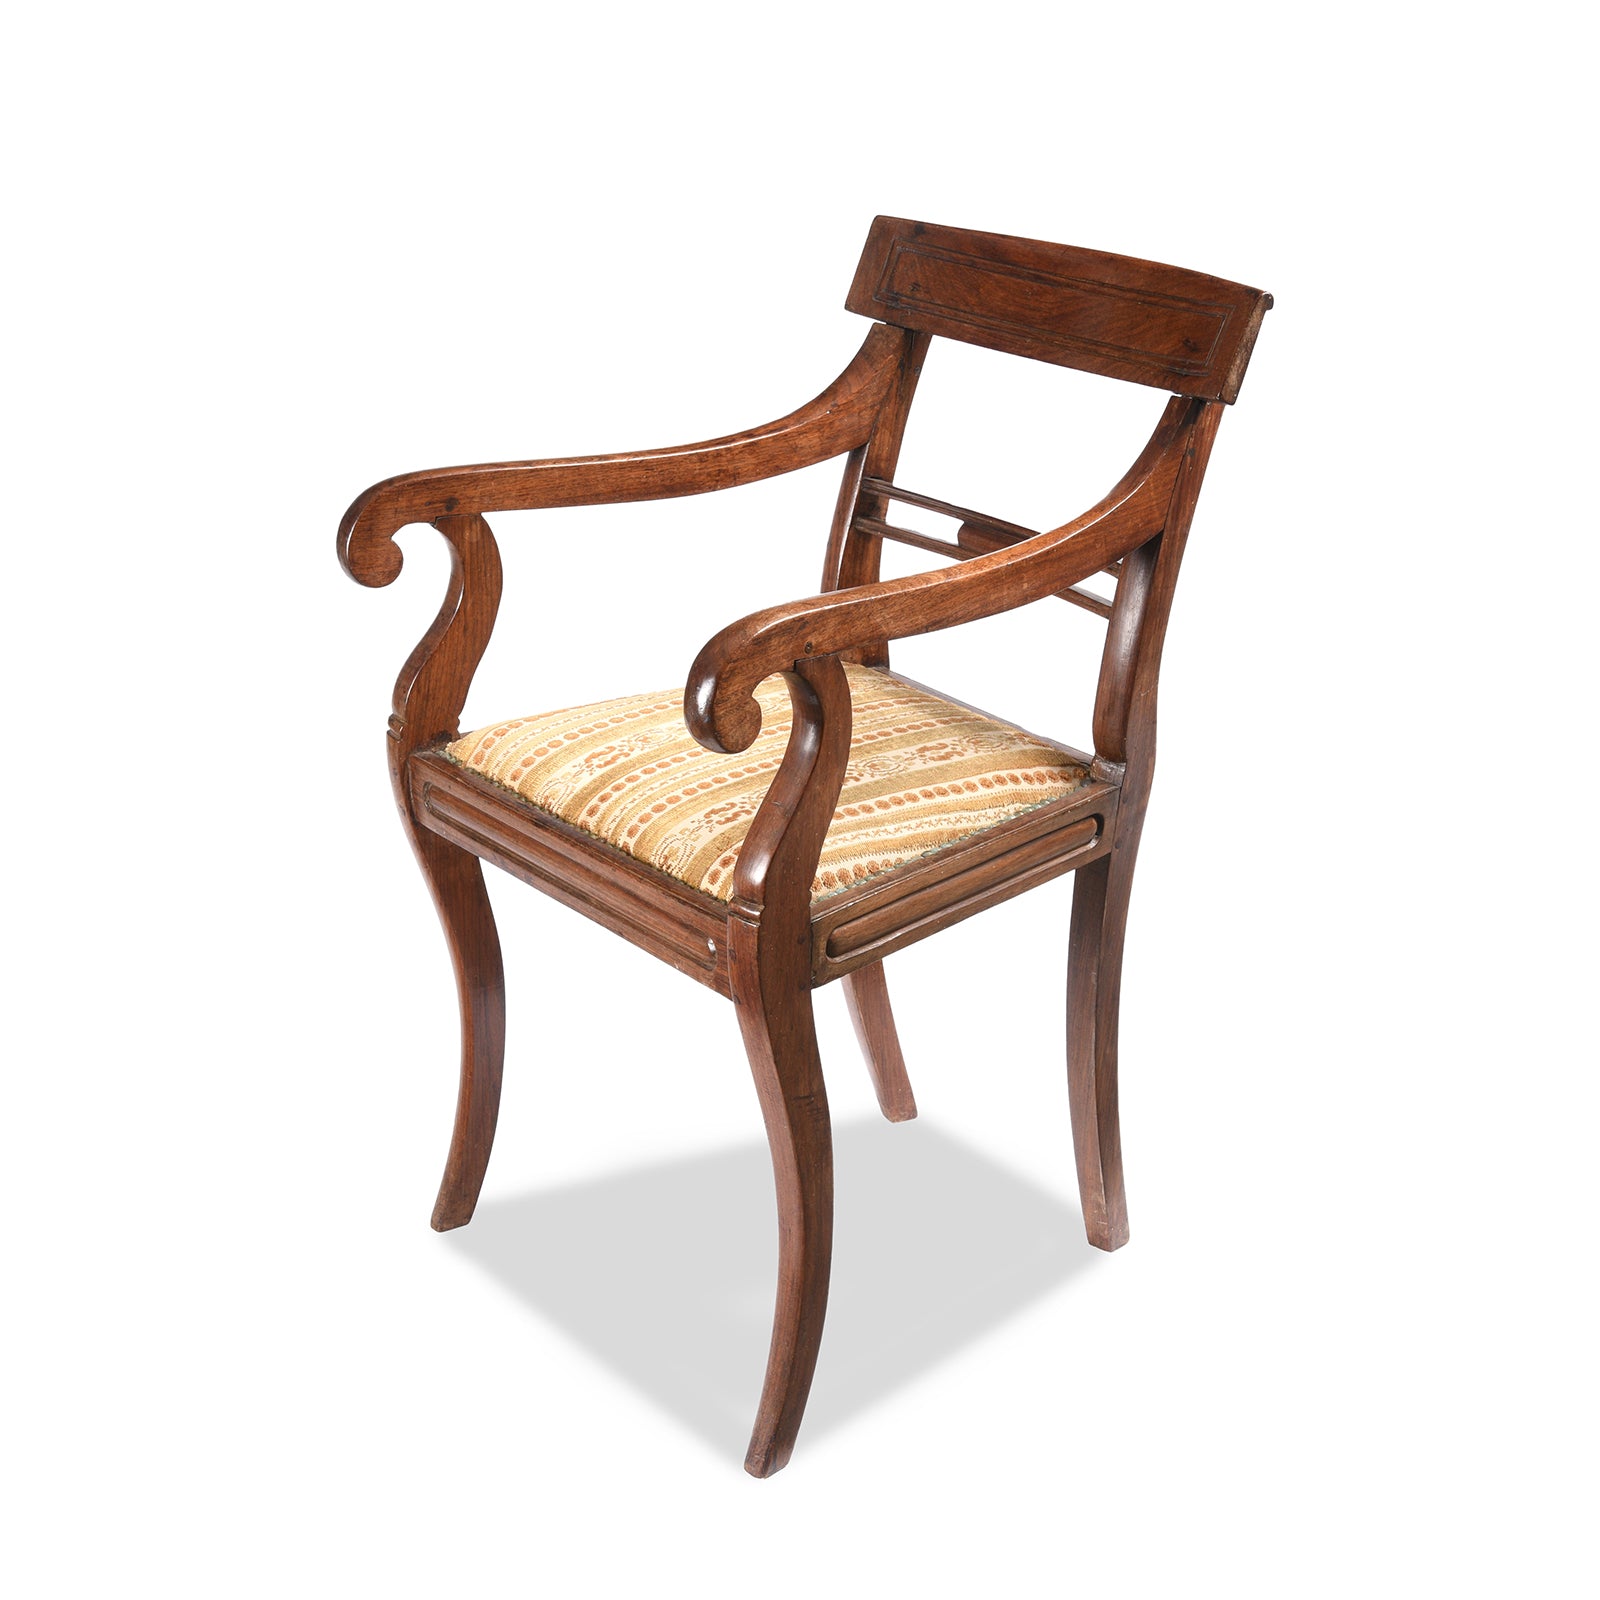 Regency Anglo-Indian Rosewood Chair - 19thC